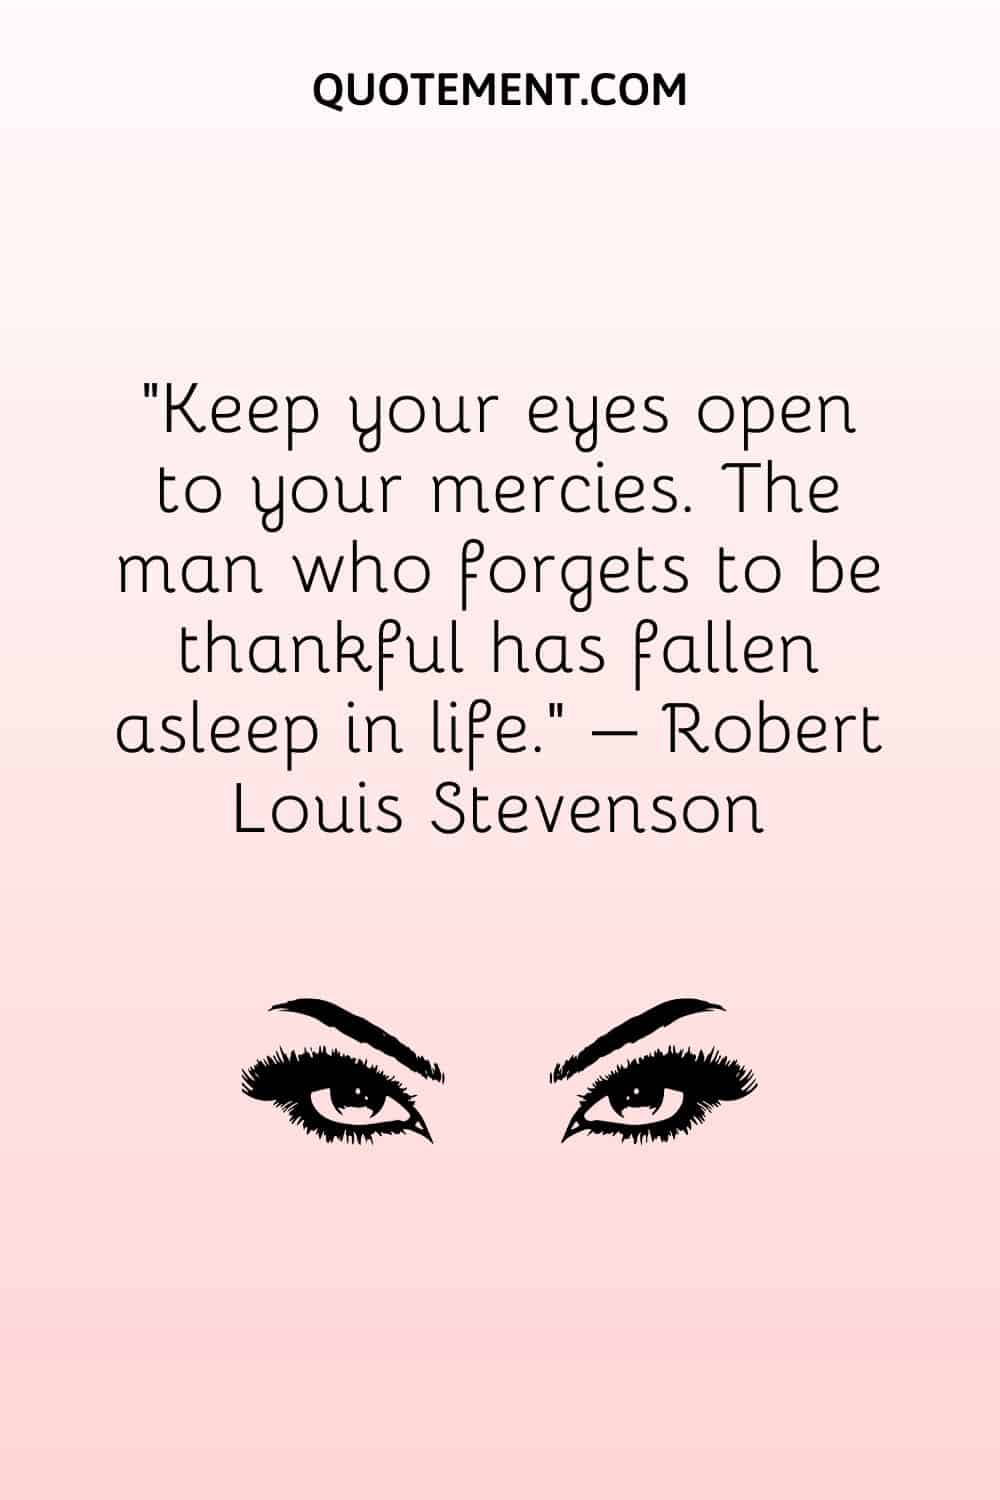 Keep your eyes open to your mercies. The man who forgets to be thankful has fallen asleep in life